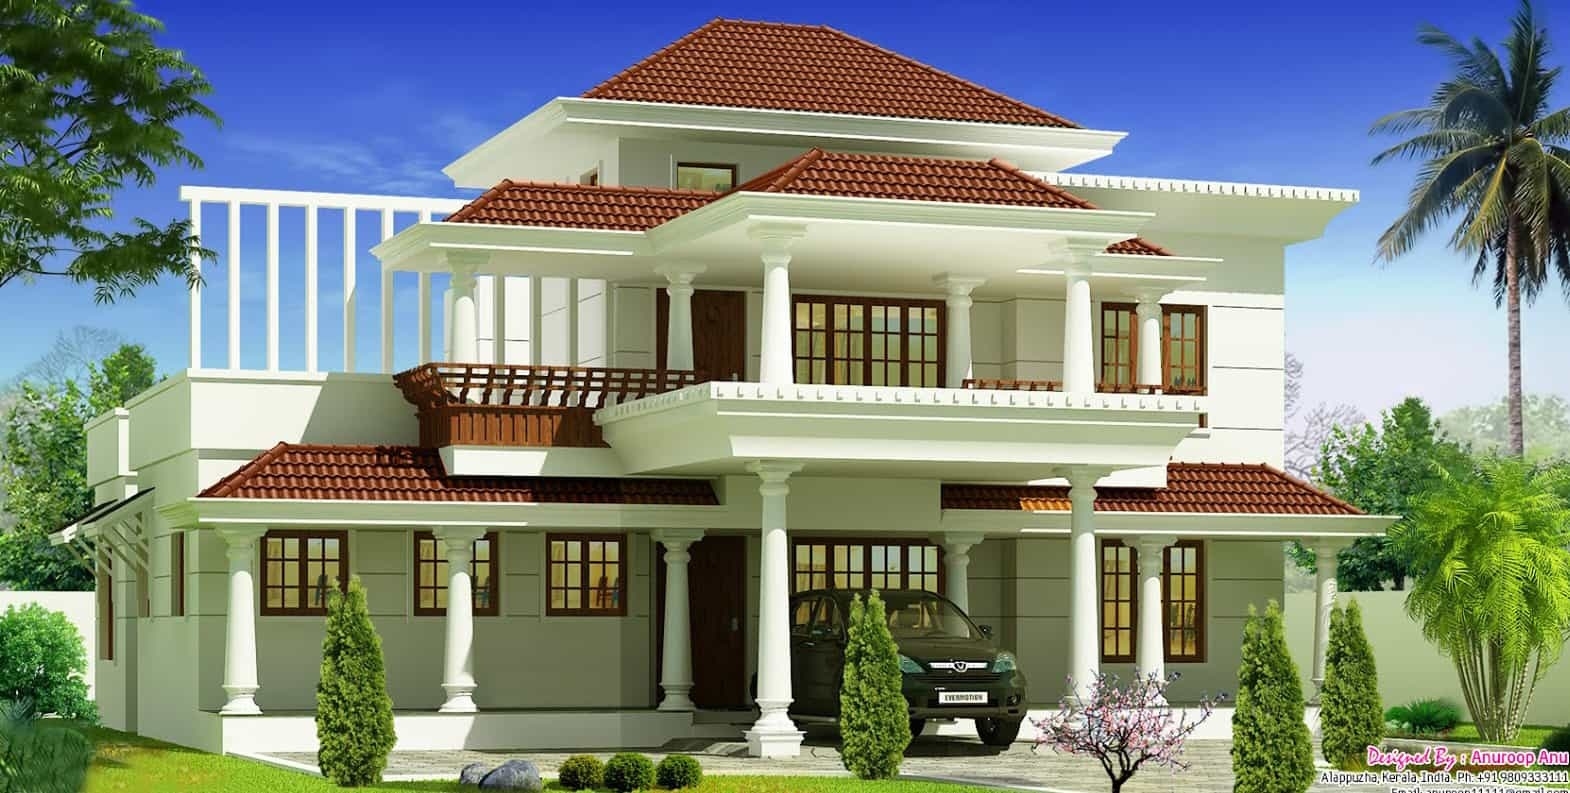 Must see two storey kerala house designs keralahouseplanner within marvelous simple house images in kerala